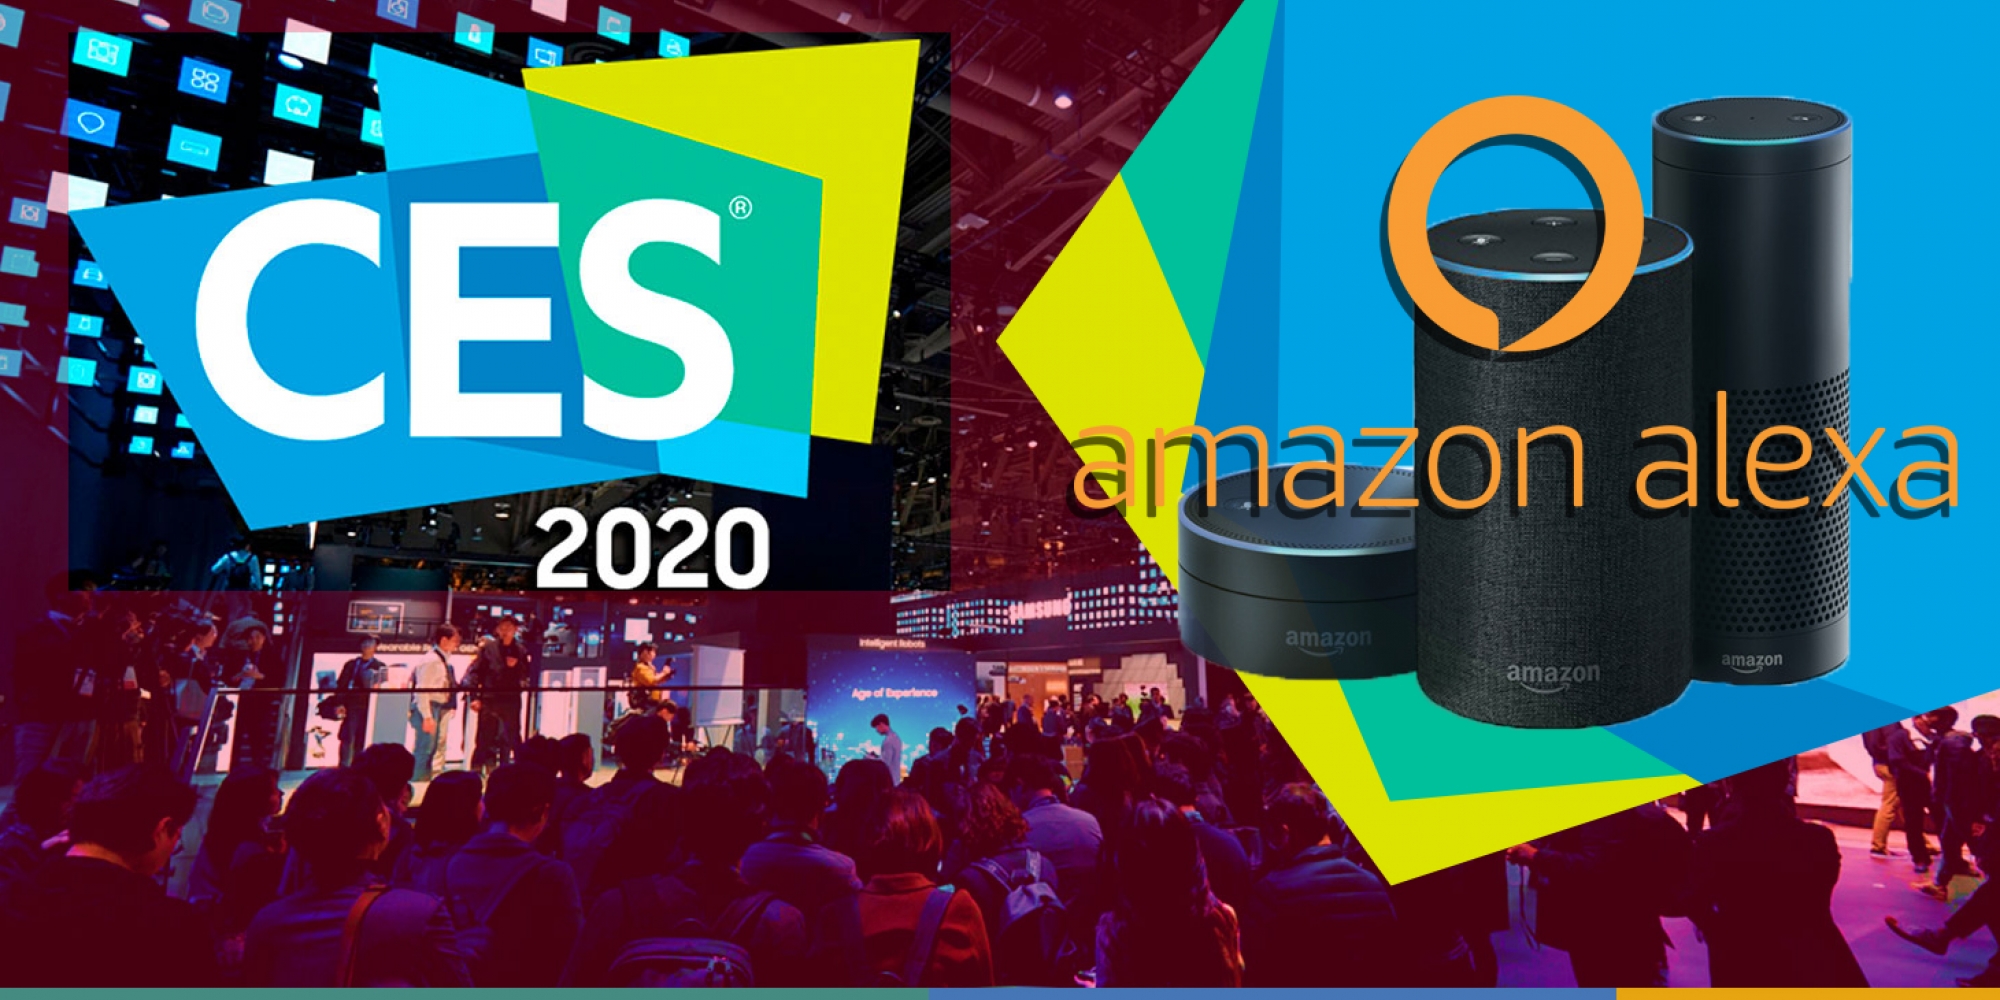 Amazon was the company with the largest presence at CES 2020 with Alexa